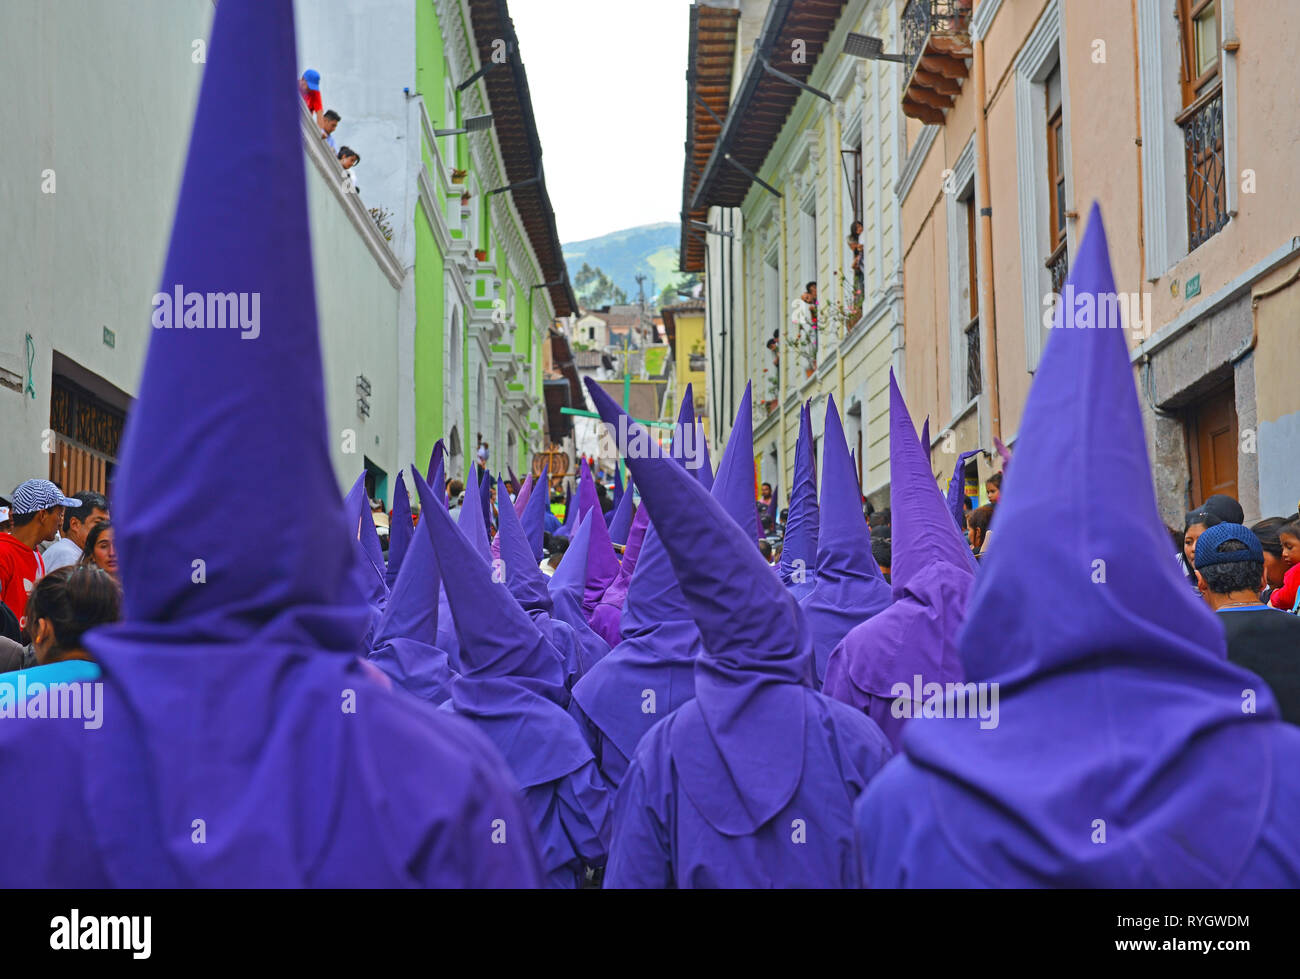 The procession of the cucuruchos in Quito, Ecuador, during Easter. Penitents put a purple robe and walk through the city on Holy Friday. Stock Photo